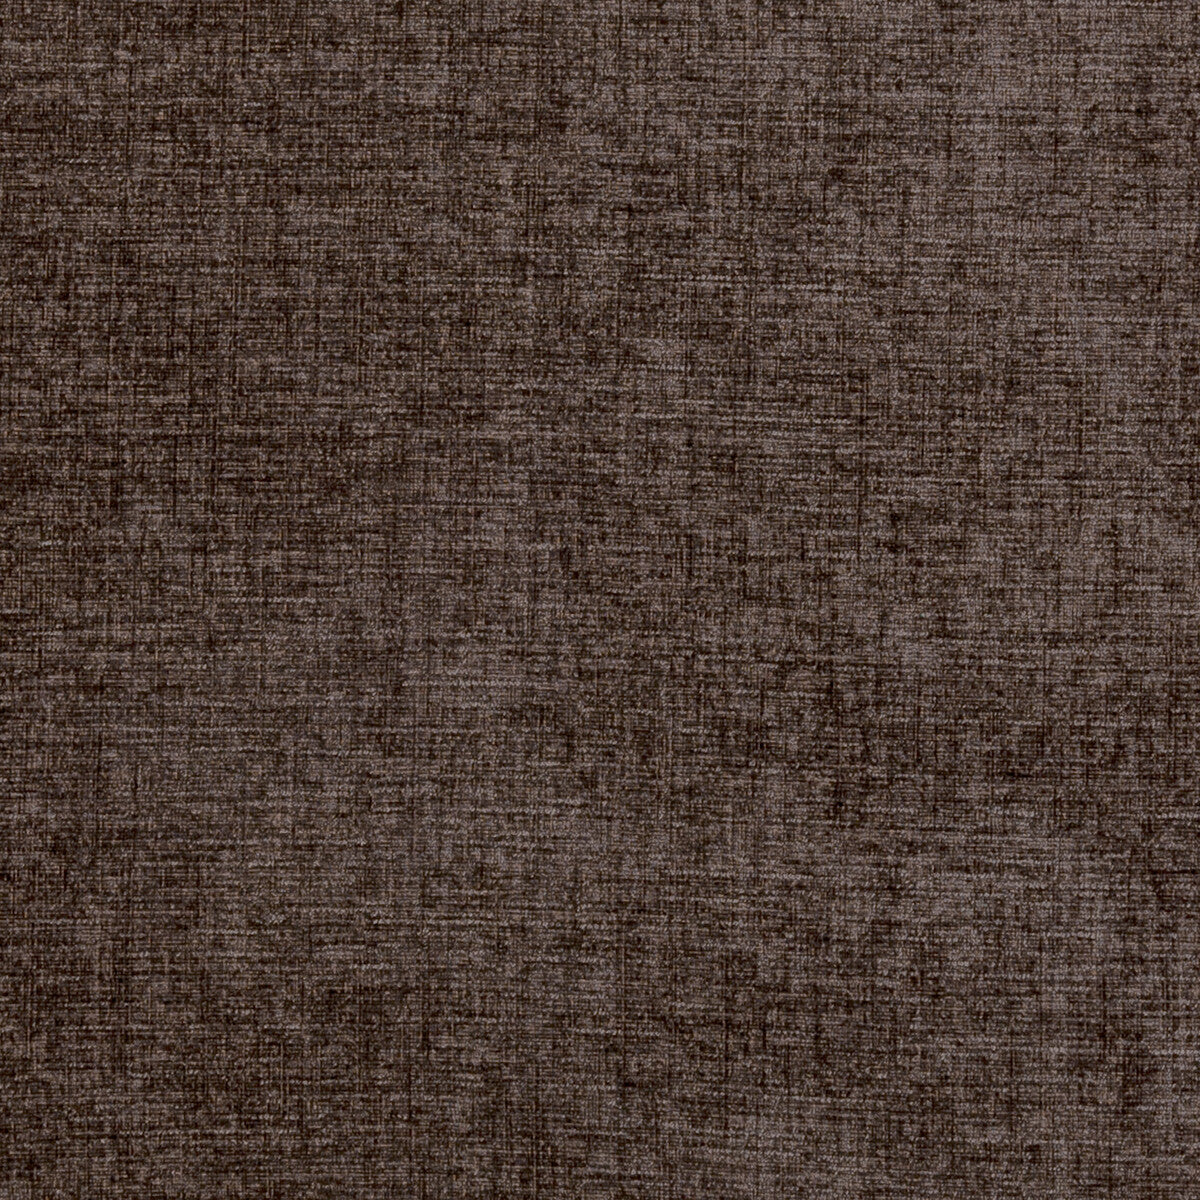 Karina fabric in gunmetal color - pattern F0371/17.CAC.0 - by Clarke And Clarke in the Clarke &amp; Clarke Karina collection